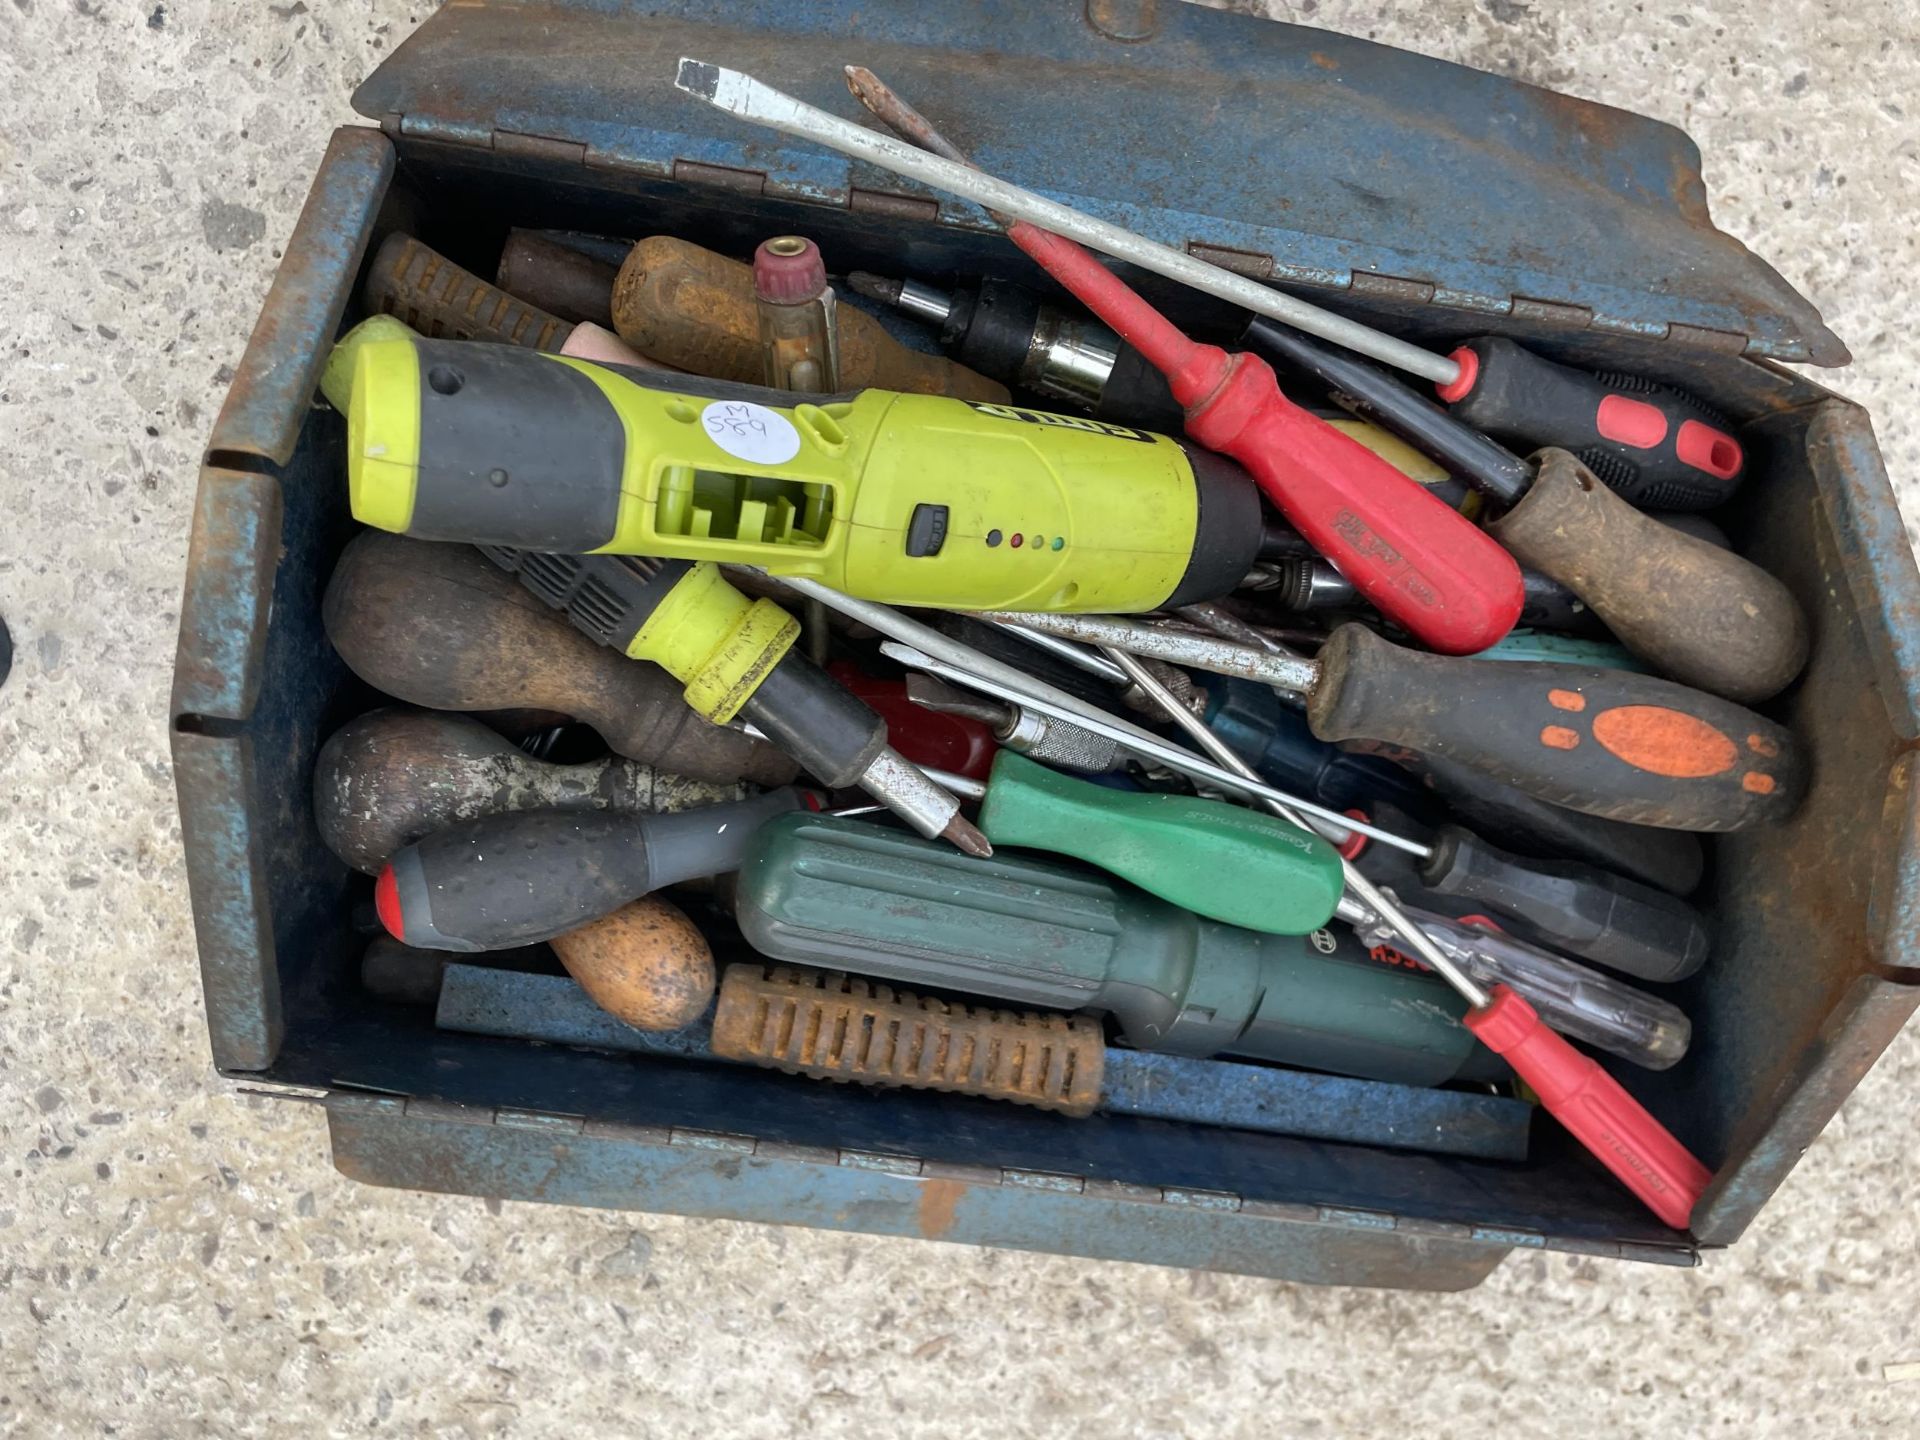 A LARGE ASSORTMENT OF TOOLS TO INCLUDE SCREW DRIVERS, POT RIVOTERS AND ELECTRIC SCREW DRIVERS ETC - Image 2 of 3